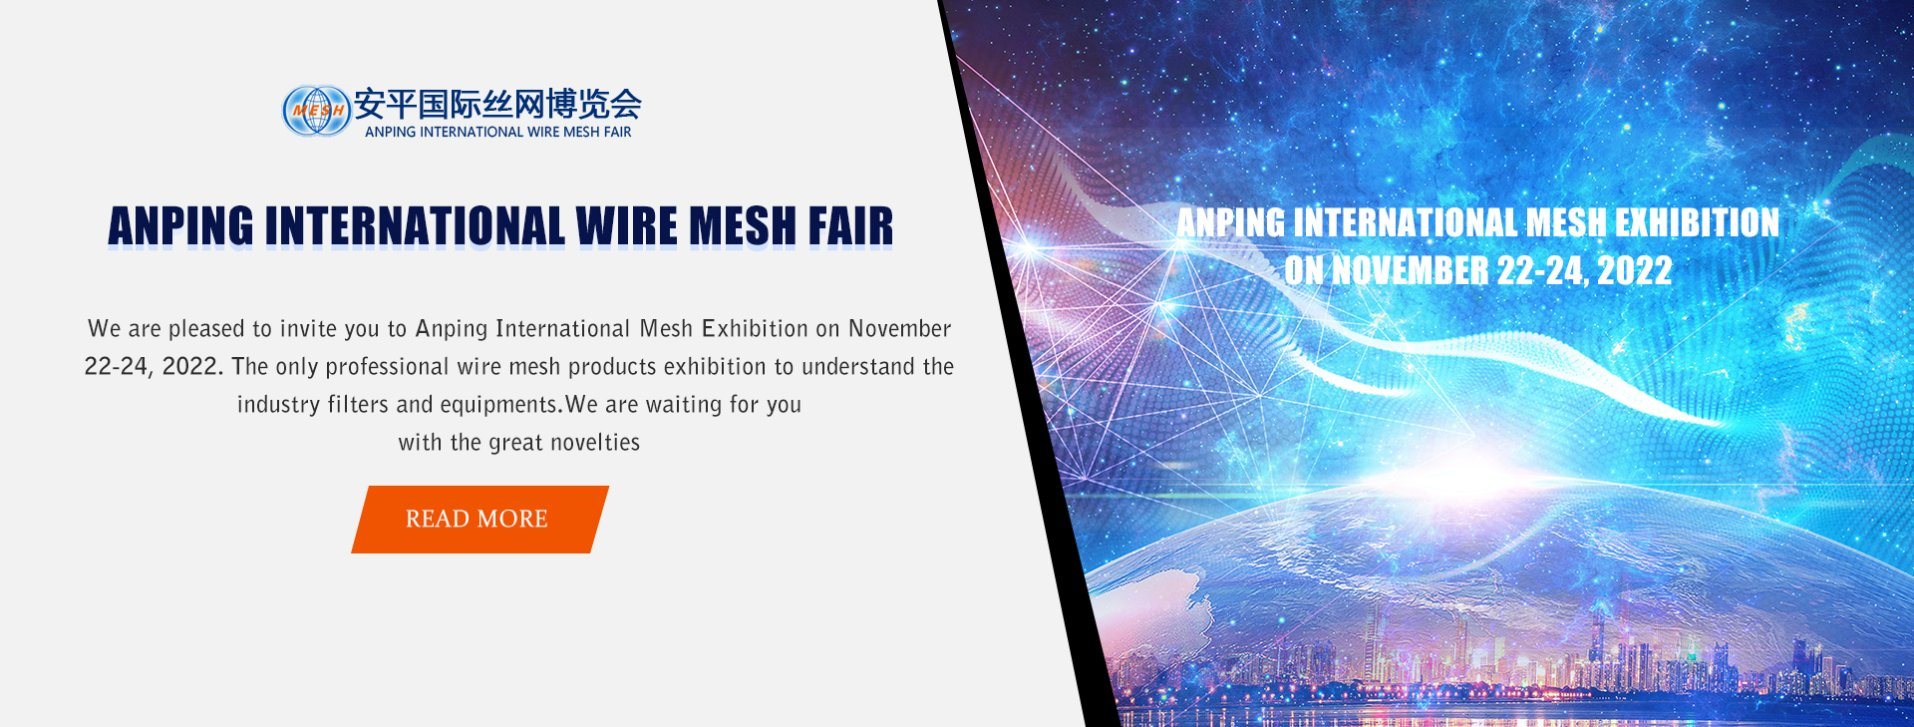 ANPING INTERTIONAL WIRE MESH EXHIBITION